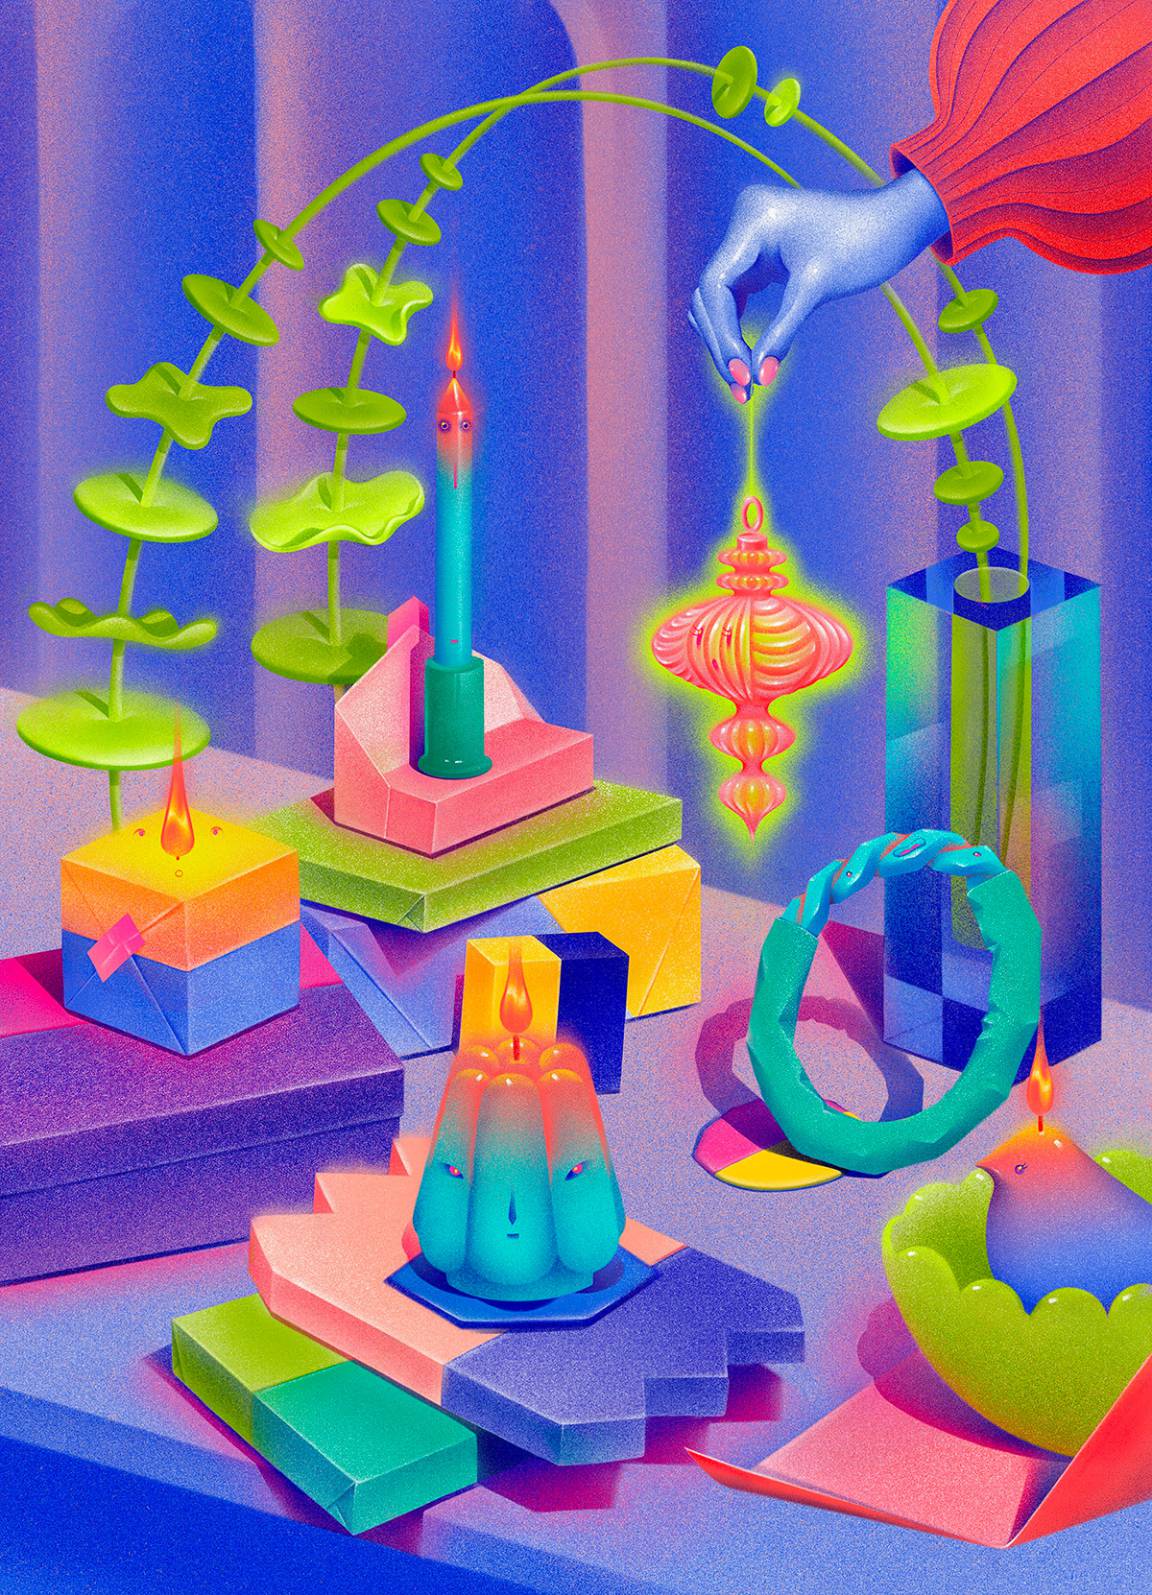 Intricate And Vibrant Surreal Illustrations By Wenjing Yang (5)